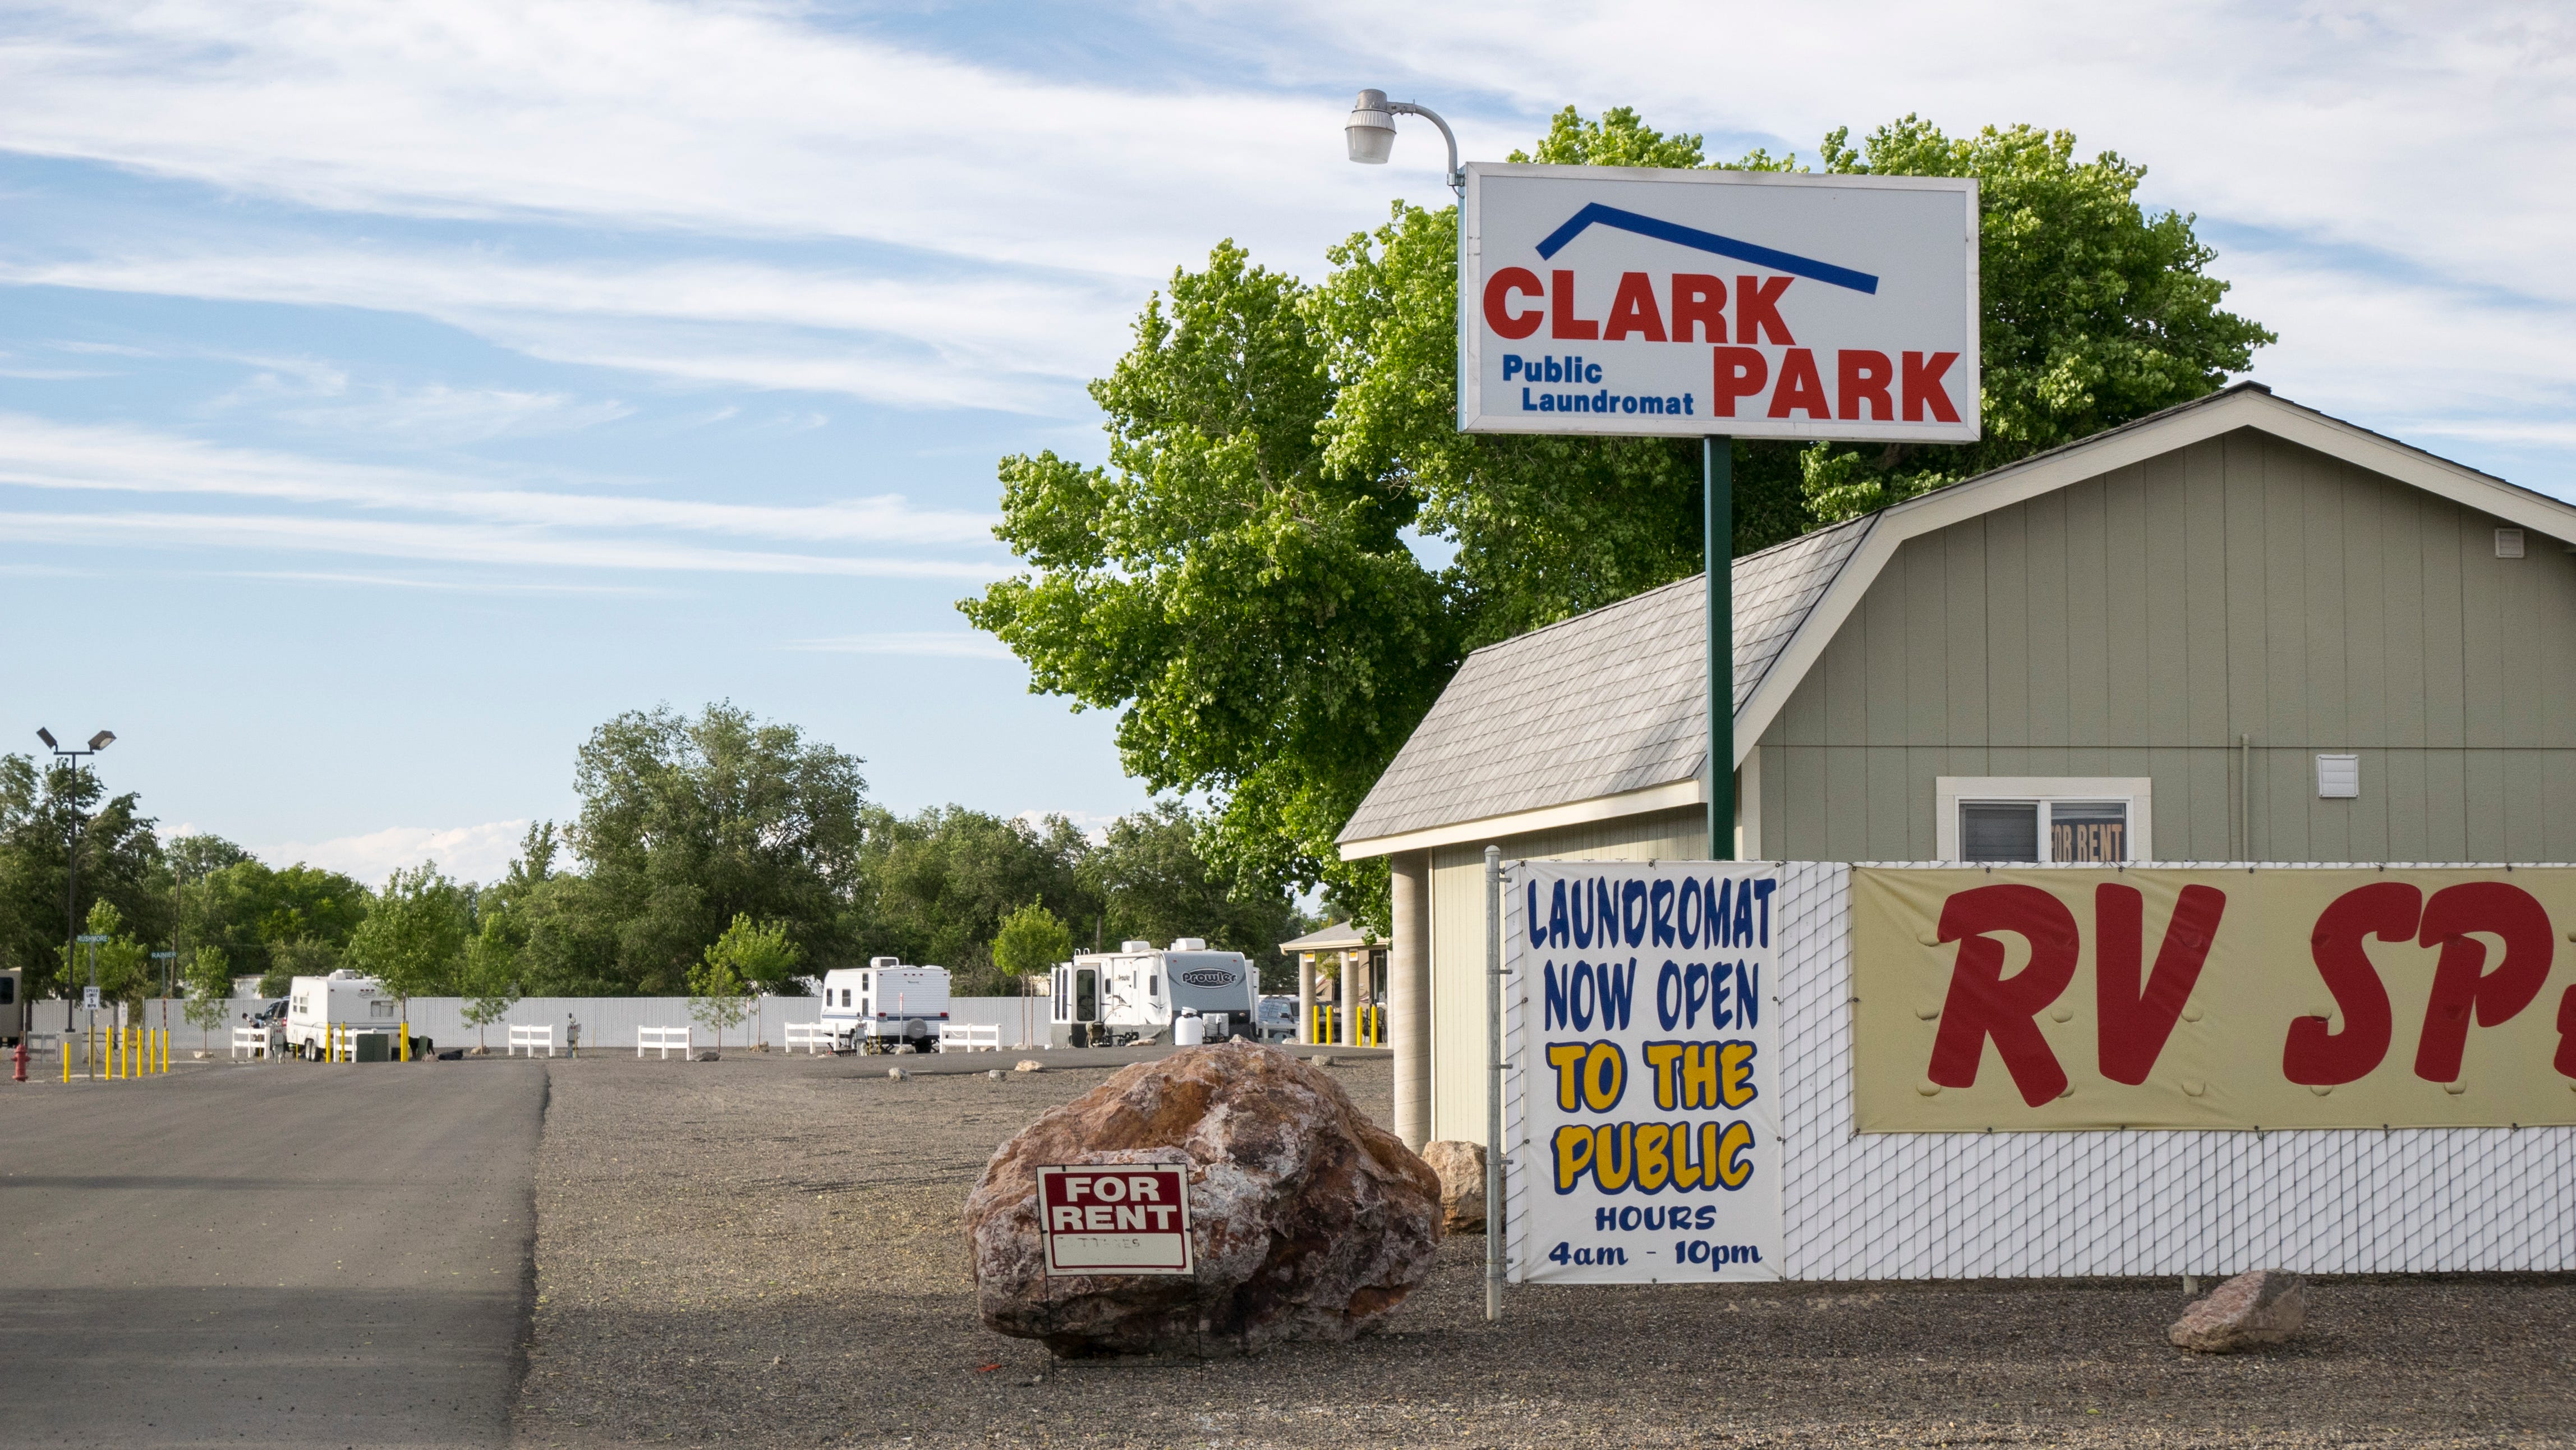 Photograph at the entrance to Clark Park RV park. A wide asphalt road leads into the park. The rest of the surface is gravel. In the background are a handful of white RV campers. A large red boulder sits at the entrance with a "For Rent" sign on it. Beside the boulder is a simple chainlink fence with white slats. A sign "Laundromat Now Open to the Public / Hours 4am - 10pm" is hung on the fence. Another sign, incomplete, hangs on the fence; it reads "RV SP..."   Behind, on a metal pole, is a backlit signt "Clark Park / Public Laundromat" Just behind the fence is a small barn-like building with a Mansard roof. The place feels empty.